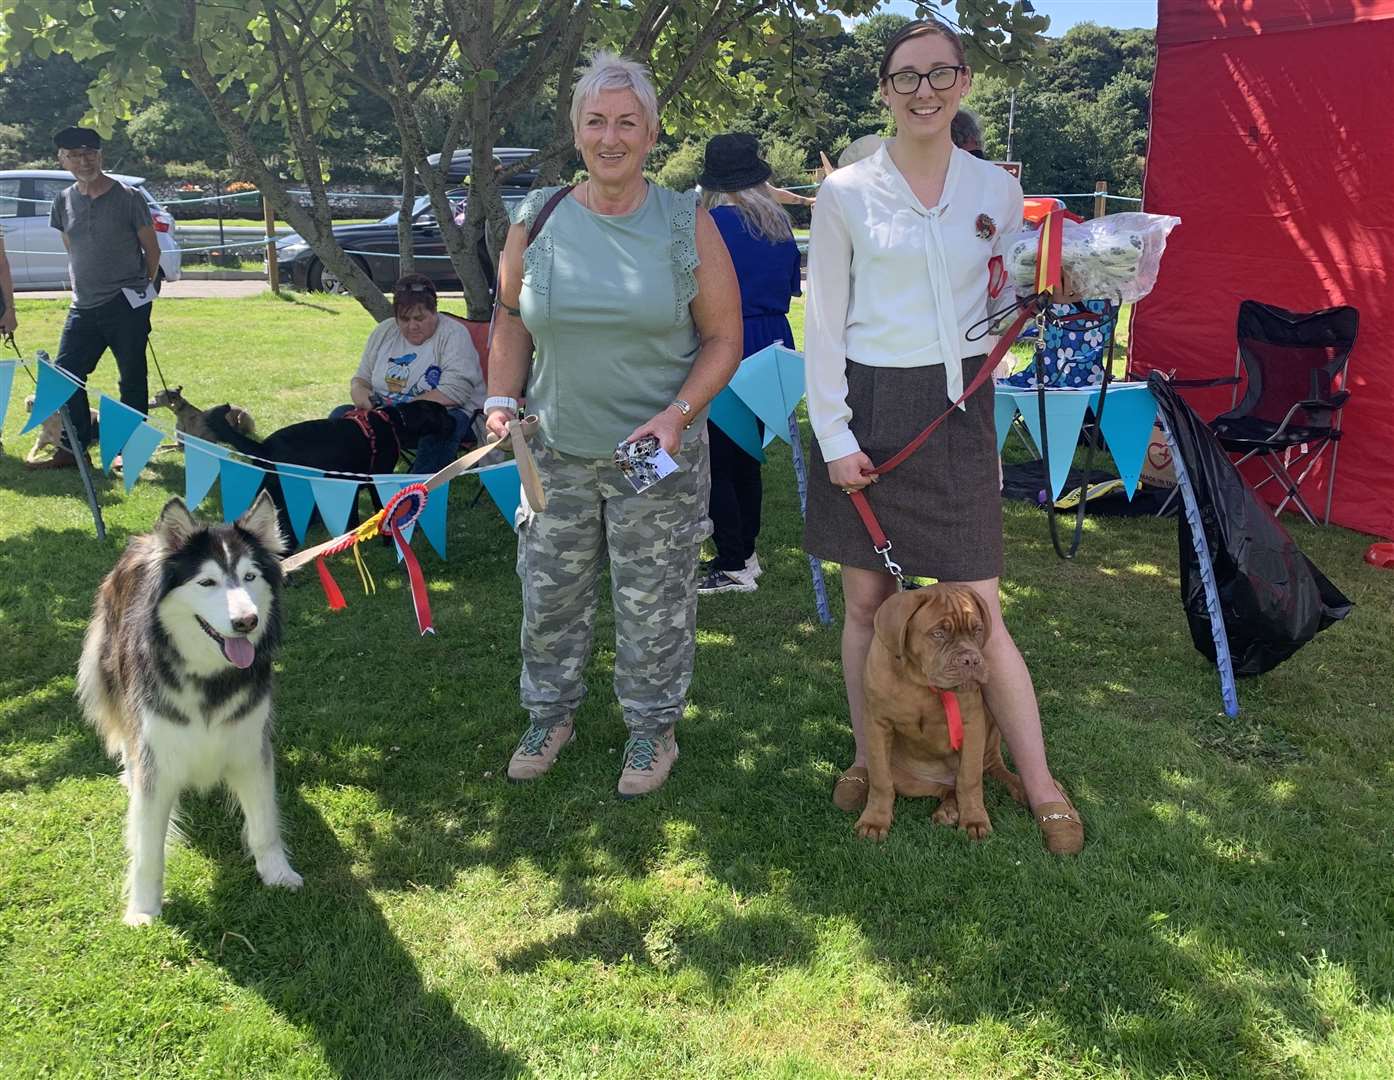 Best in Show Magnus the Dogue De Bordeaux with his owner Kimberley Spiers (right) and runner-up Bandit the Husky/ German Shepherd with owner Morag Macpherson.